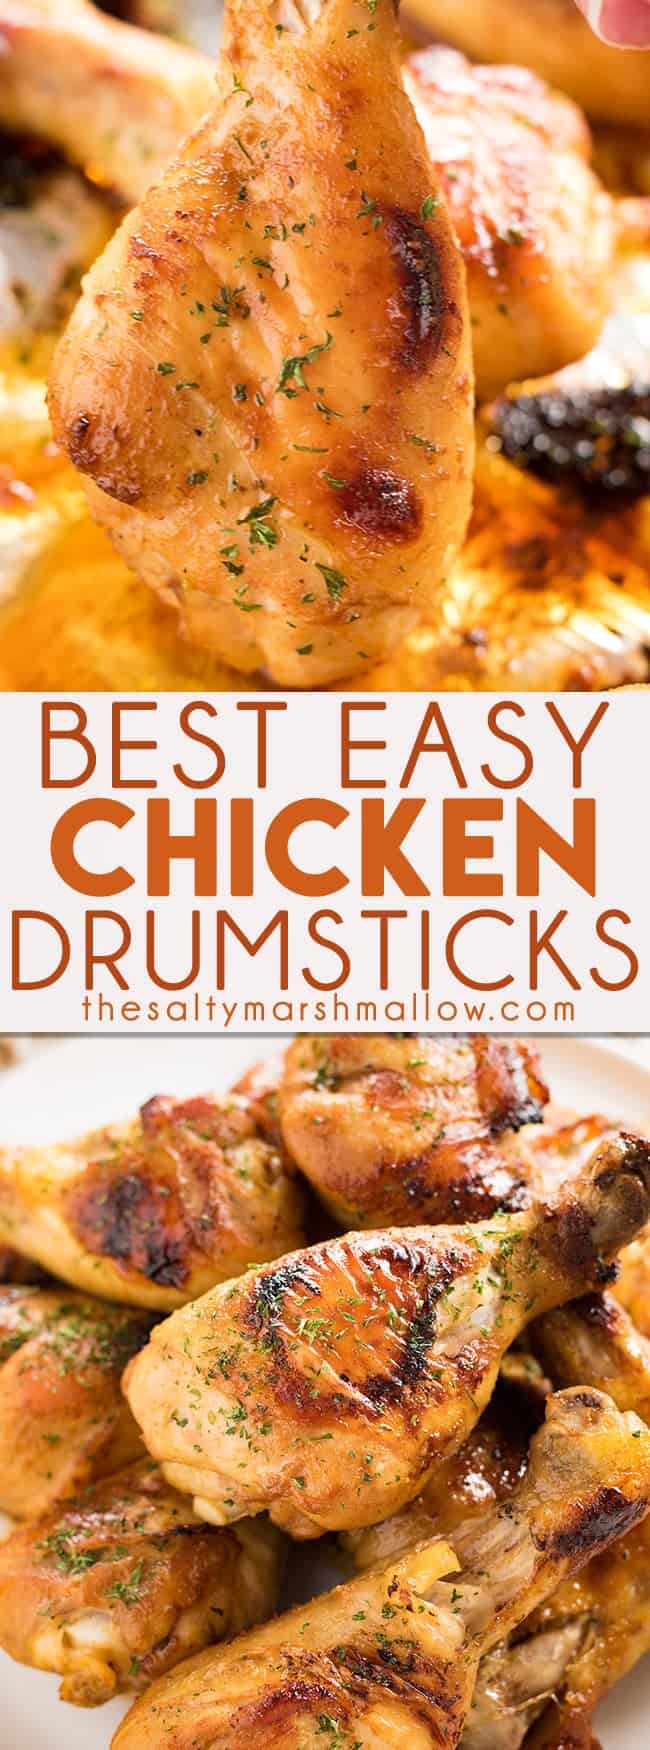 Easy Baked Chicken Drumsticks Recipe - The Salty Marshmallow